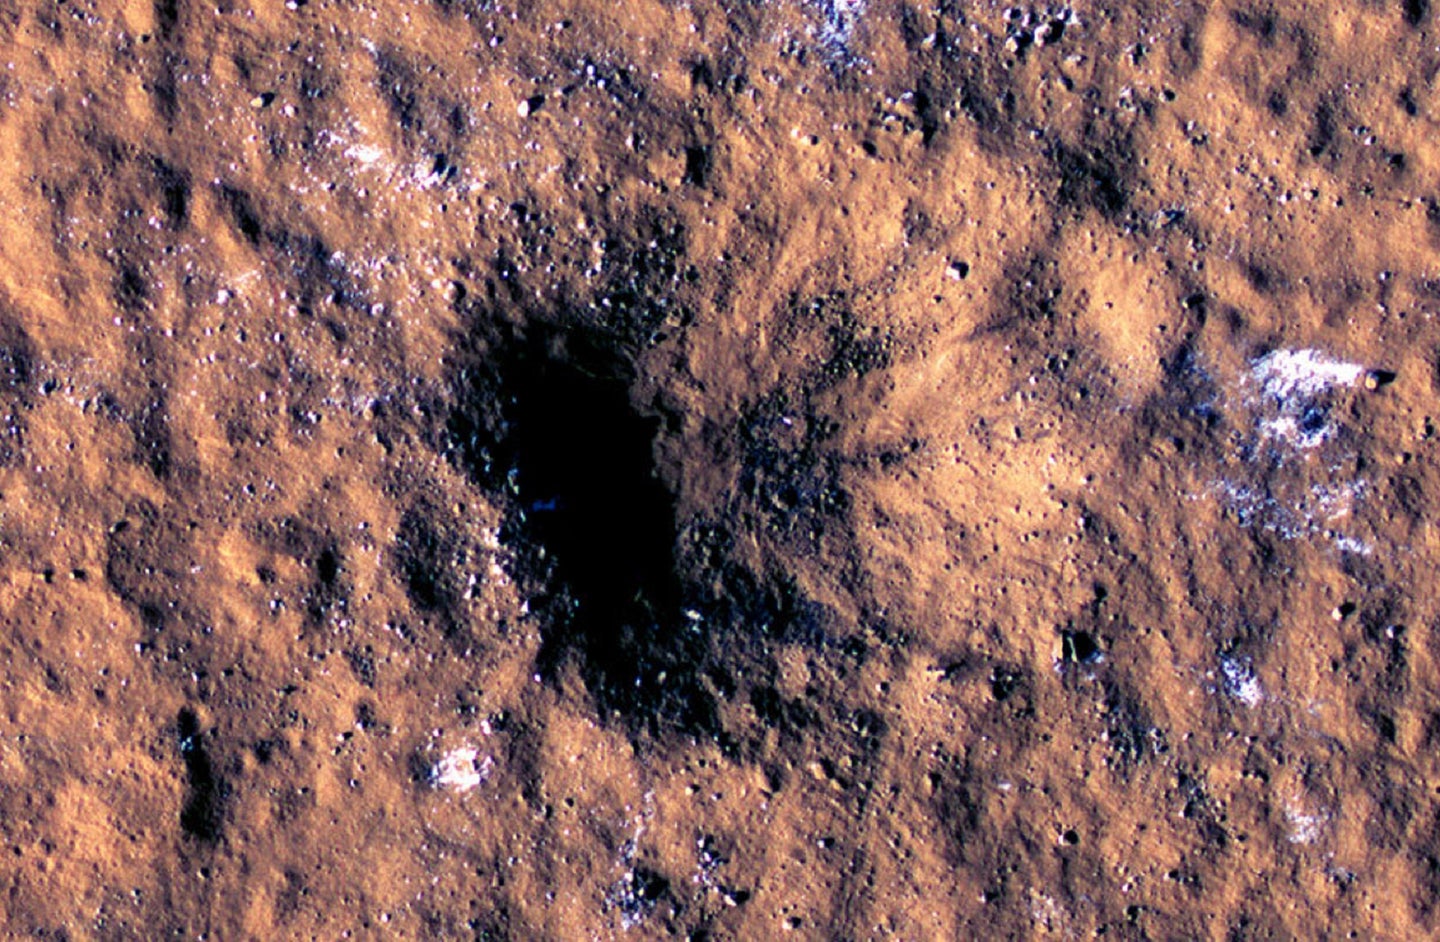 Mars surface impact crater from meteor strike with water ice captured by NASA instruments